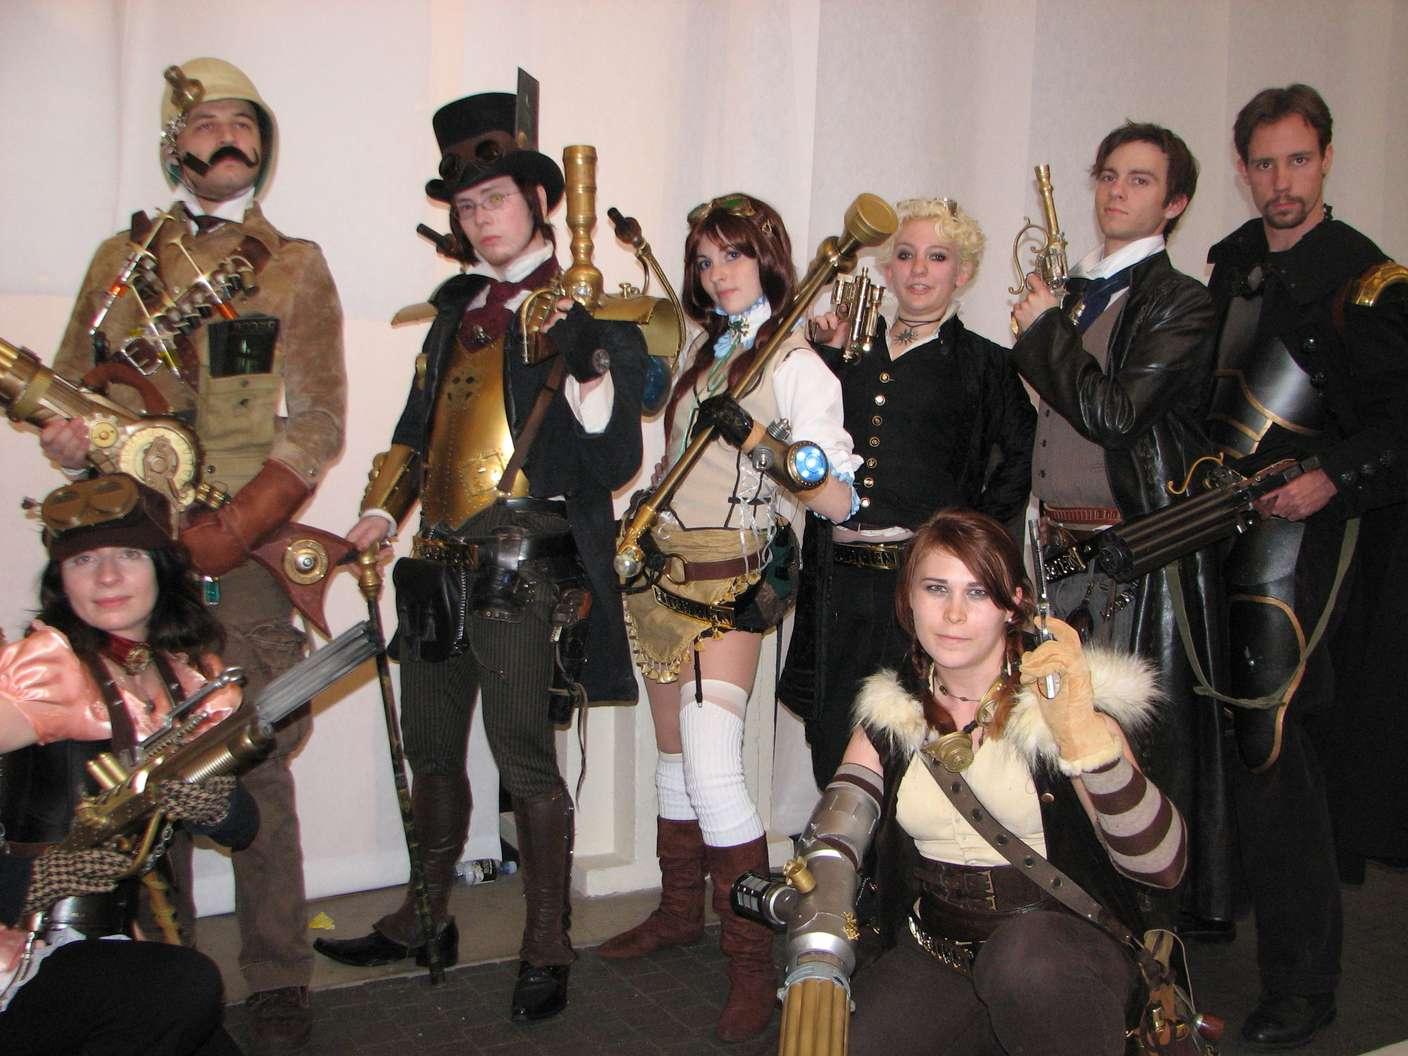 in Steampunk clothing.